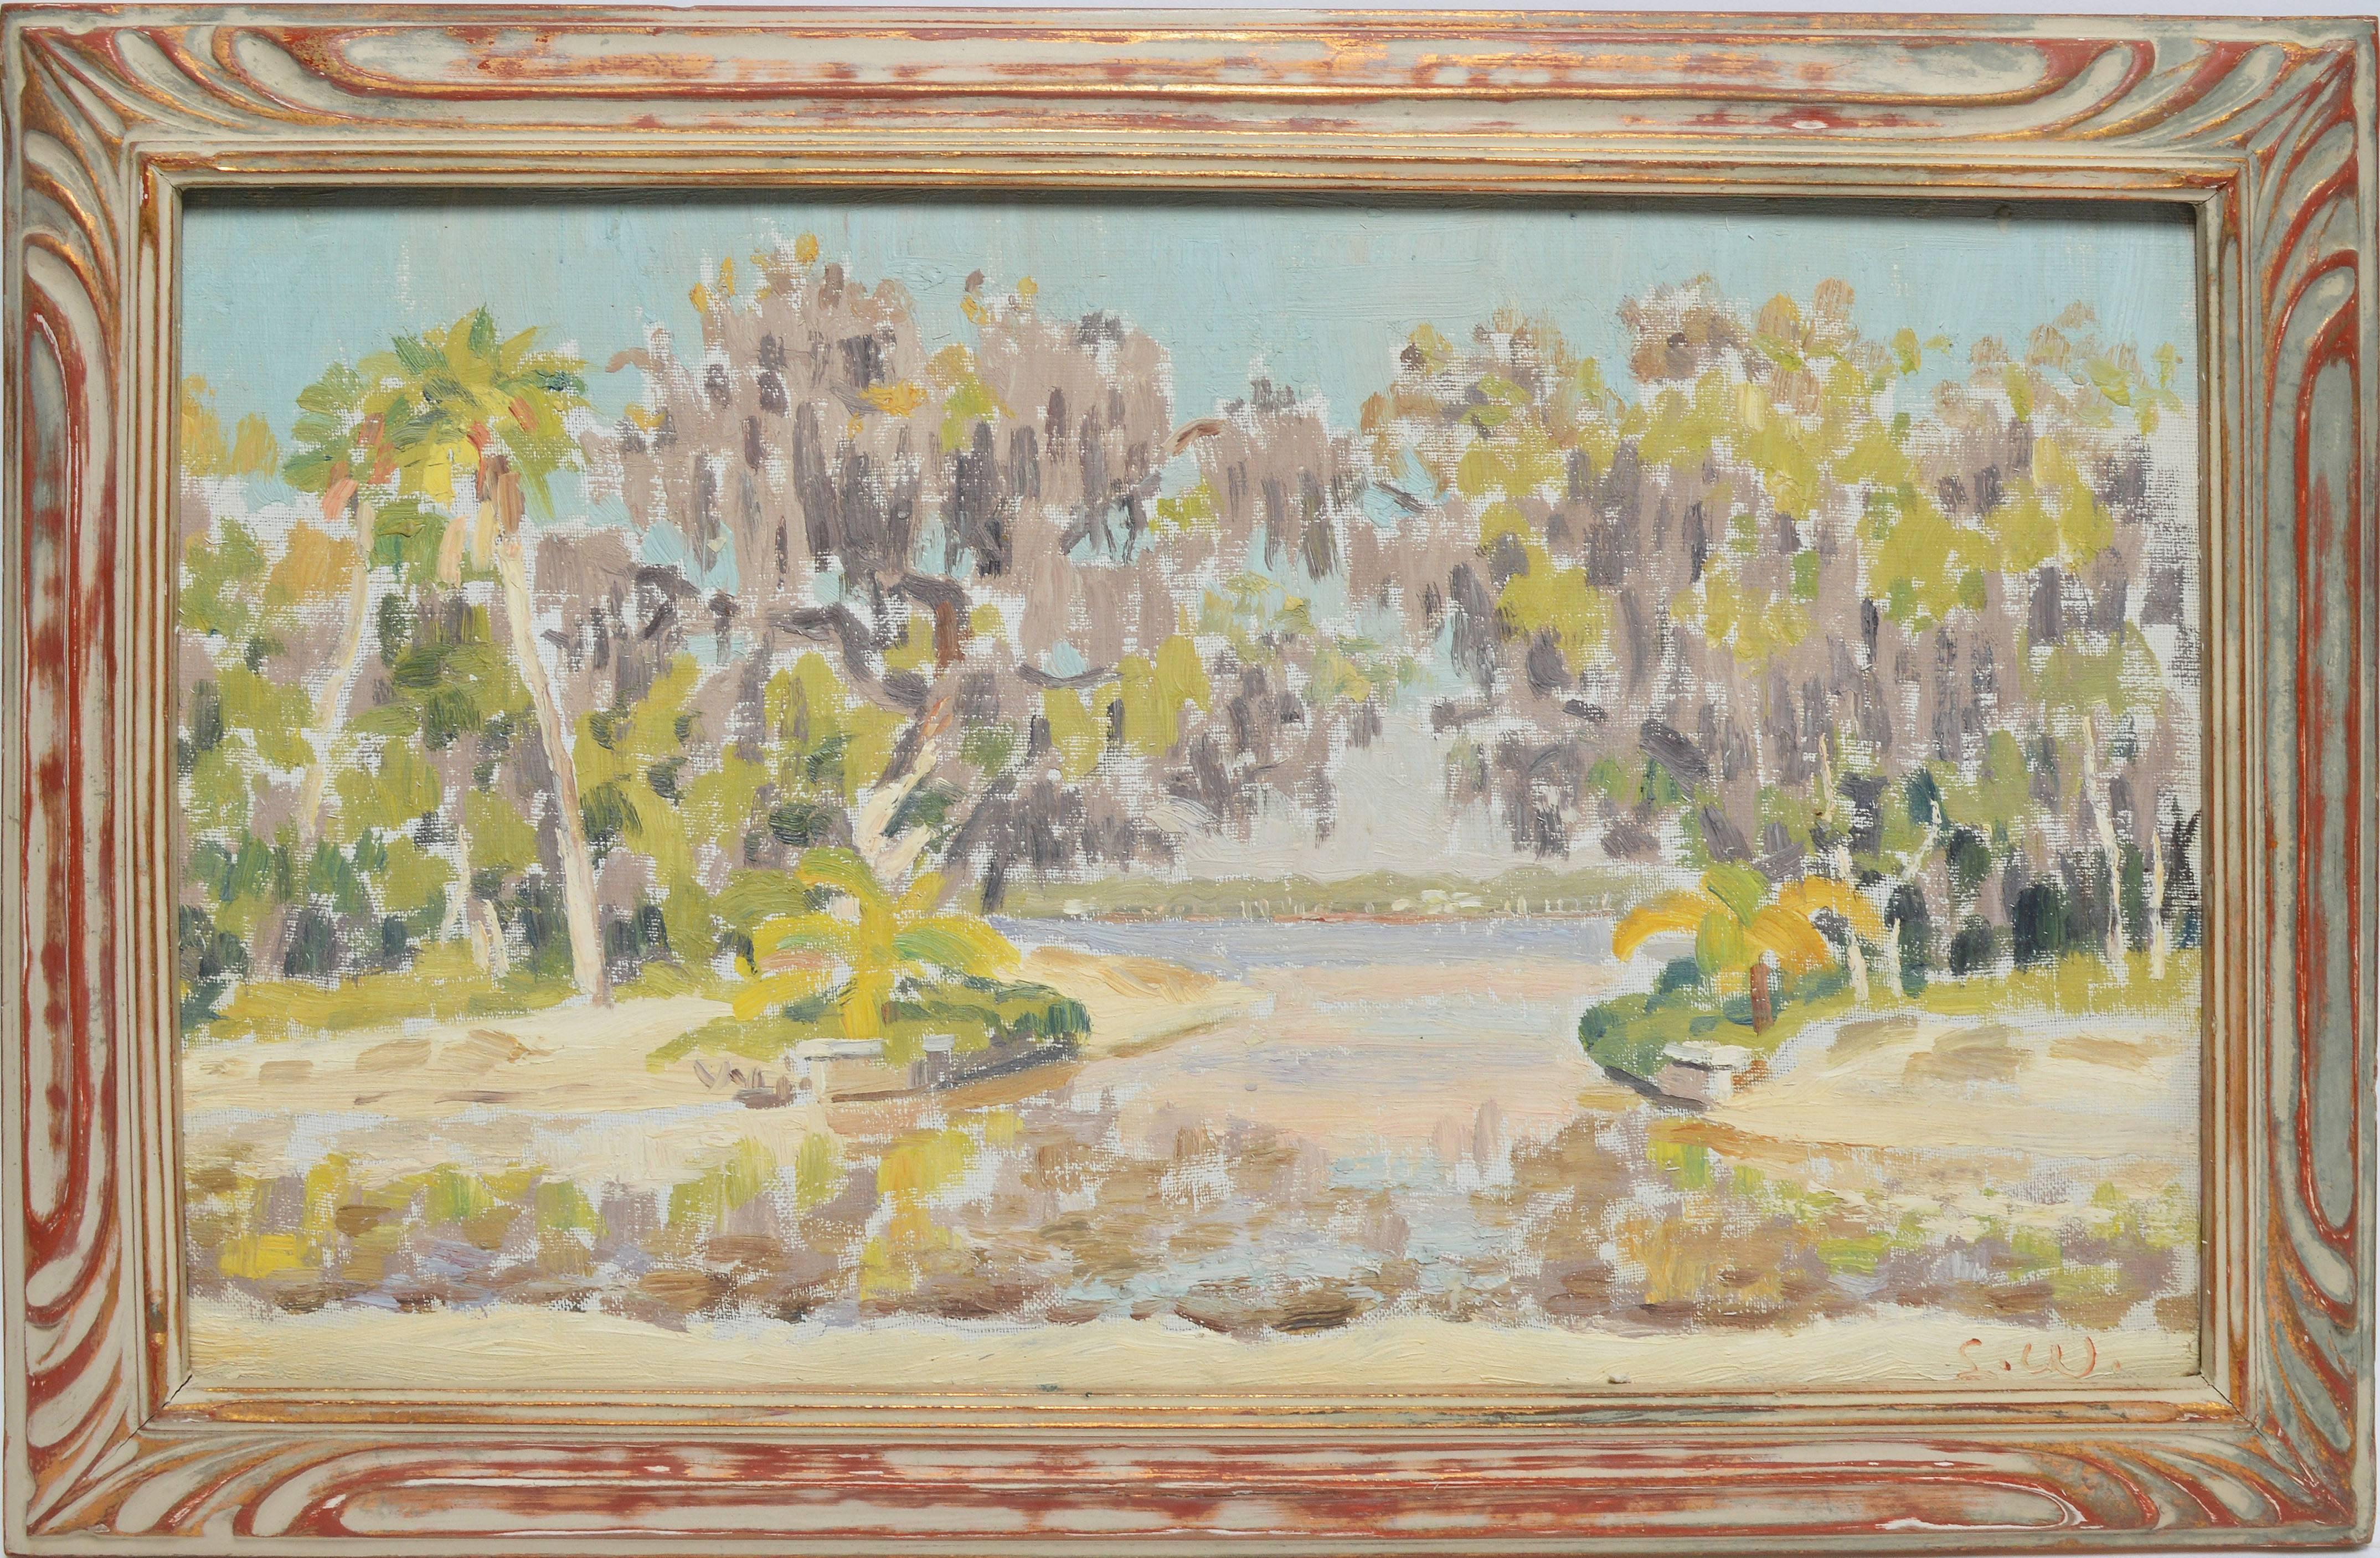 Impressionist view of a swamp by Ellsworth Woodward  (1861 - 1939).  Oil on board, circa 1920.  Signed lower right, "E.W.".  Displayed in a period impressionist frame.  Image size, 16"L x 9.5"H, overall 18.5"L x 12"H.